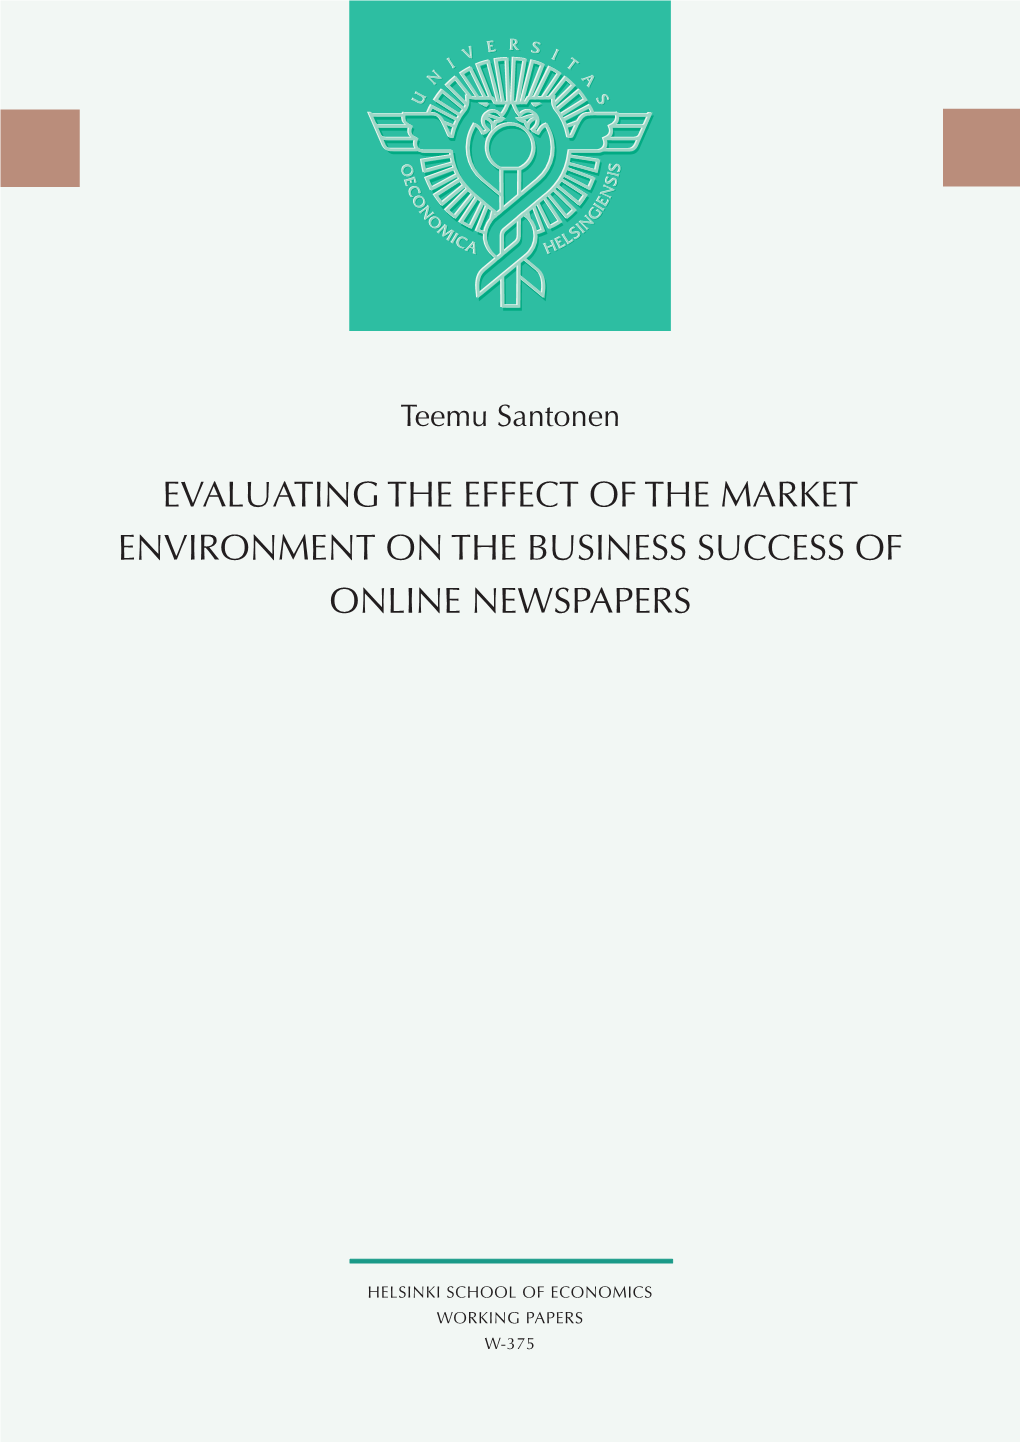 Evaluating the Effect of the Market Environment on the Business Success of Online Newspapers